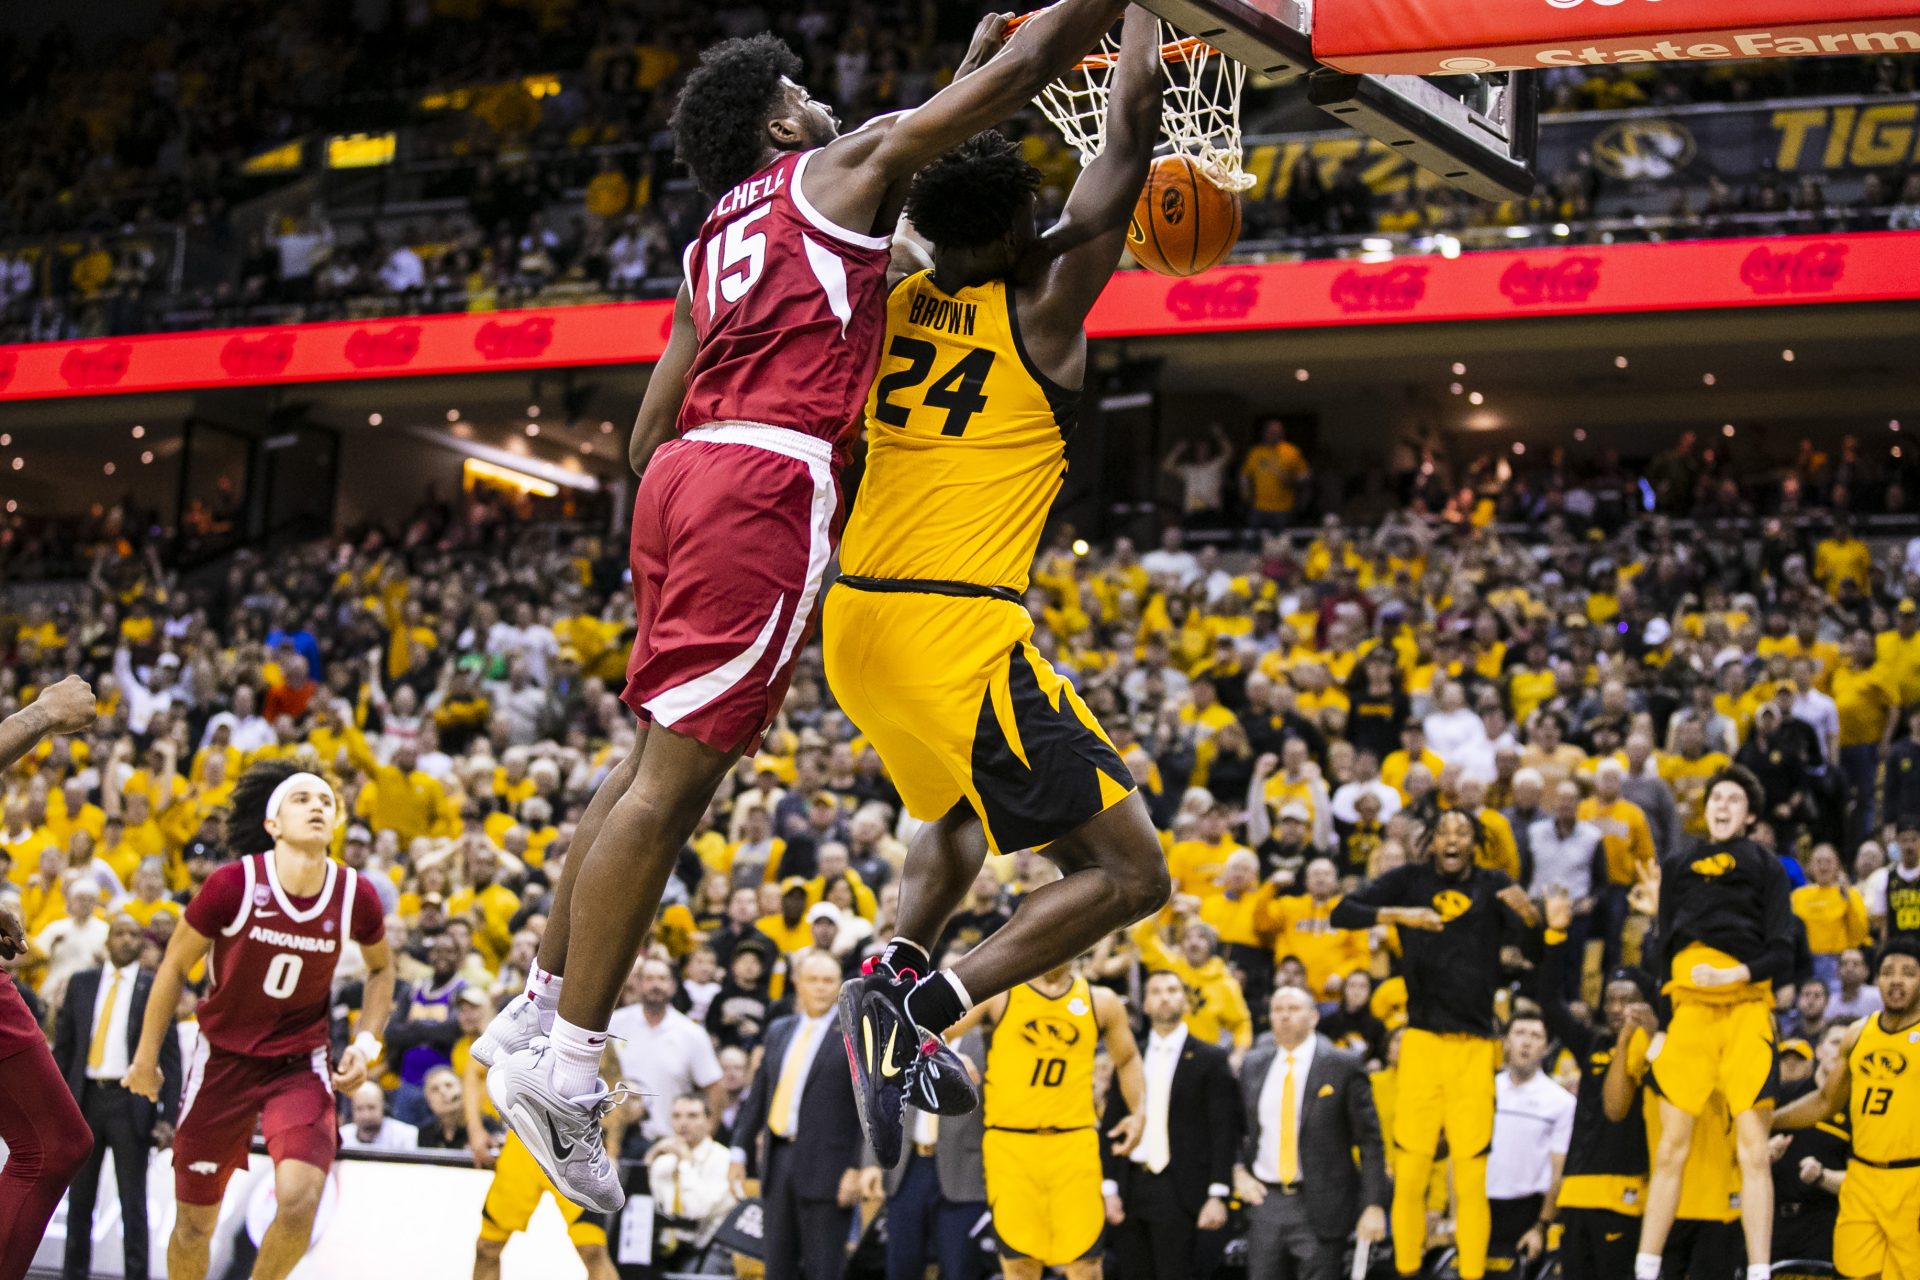 Mizzou’s Brown is a first-round draft choice; he’ll play for Tyronn Lue in LA